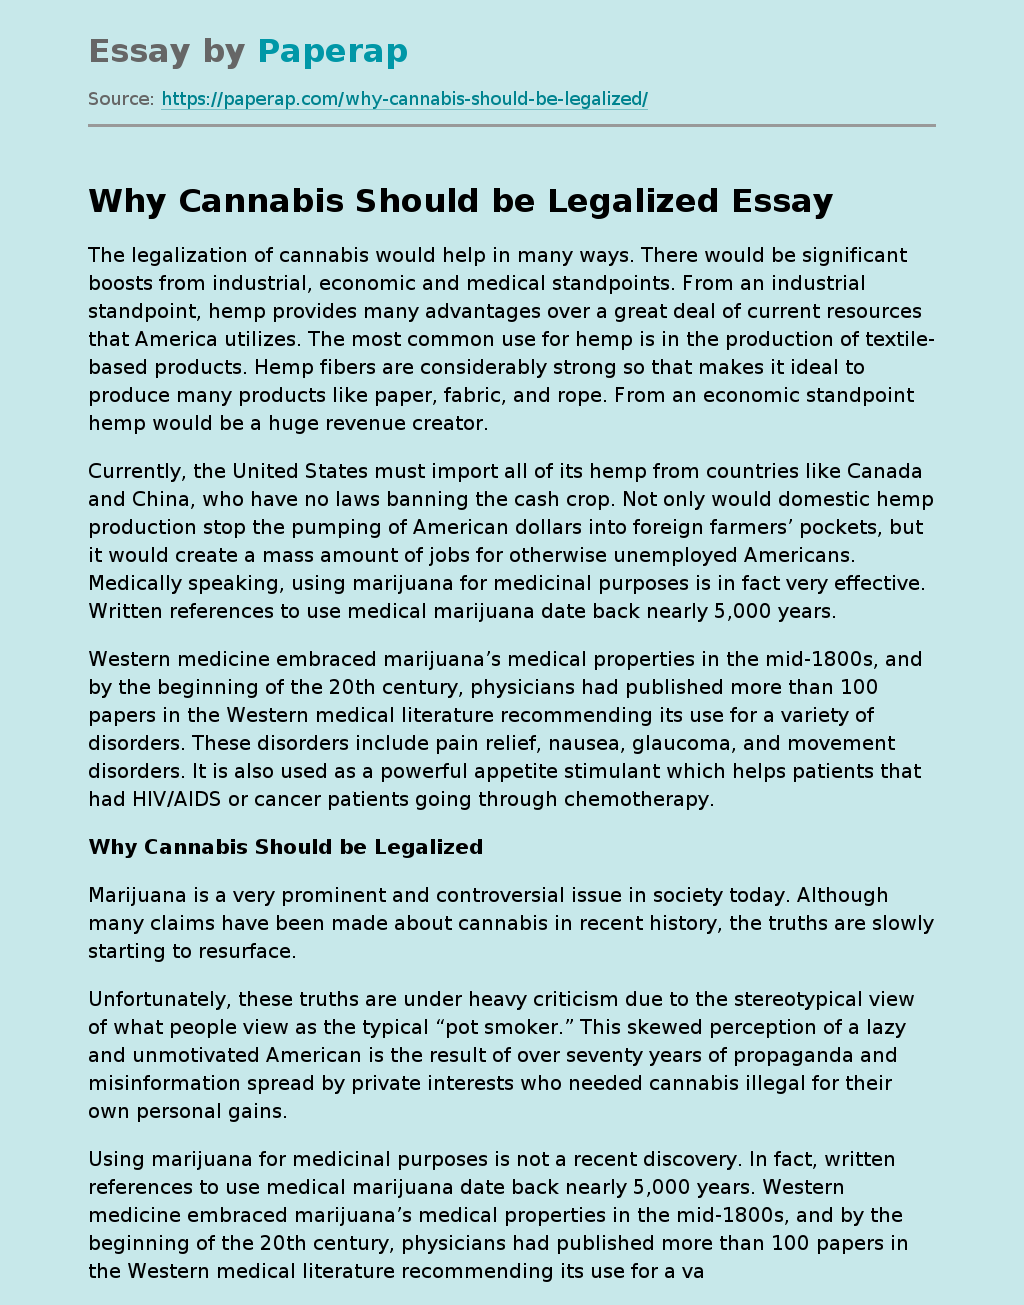 Why Cannabis Should be Legalized?